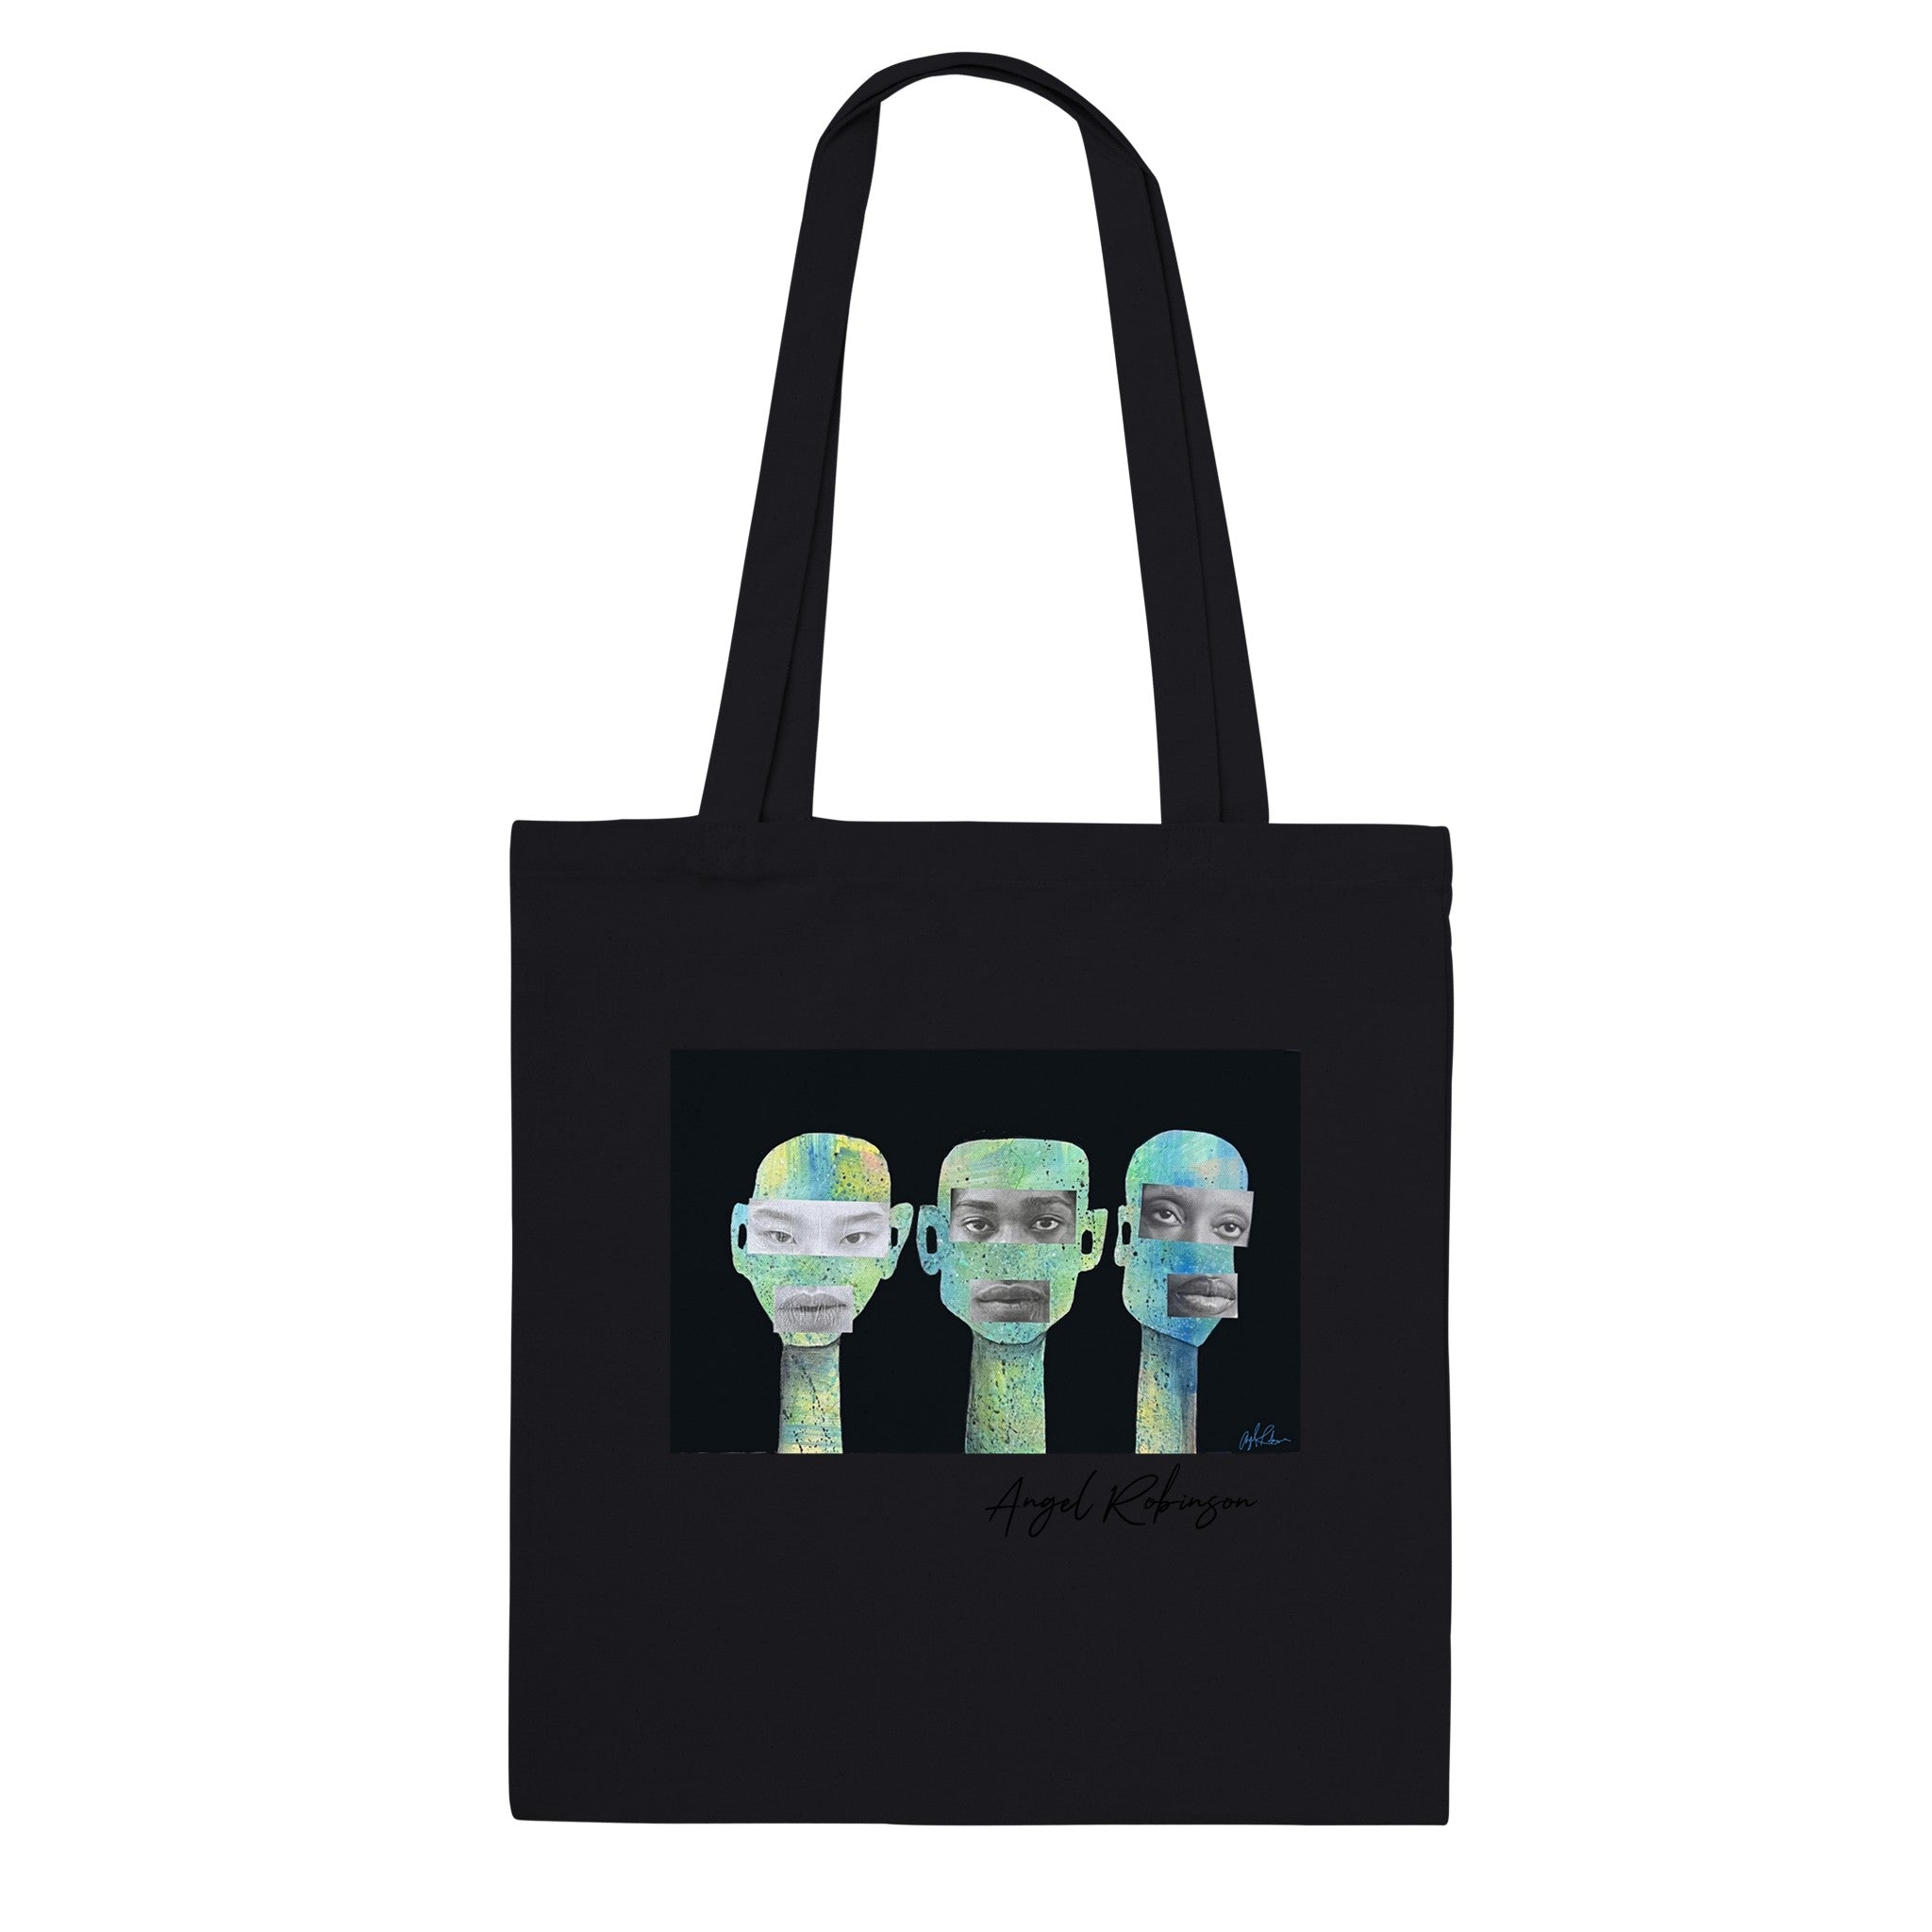 Join in Unity Tote Bag